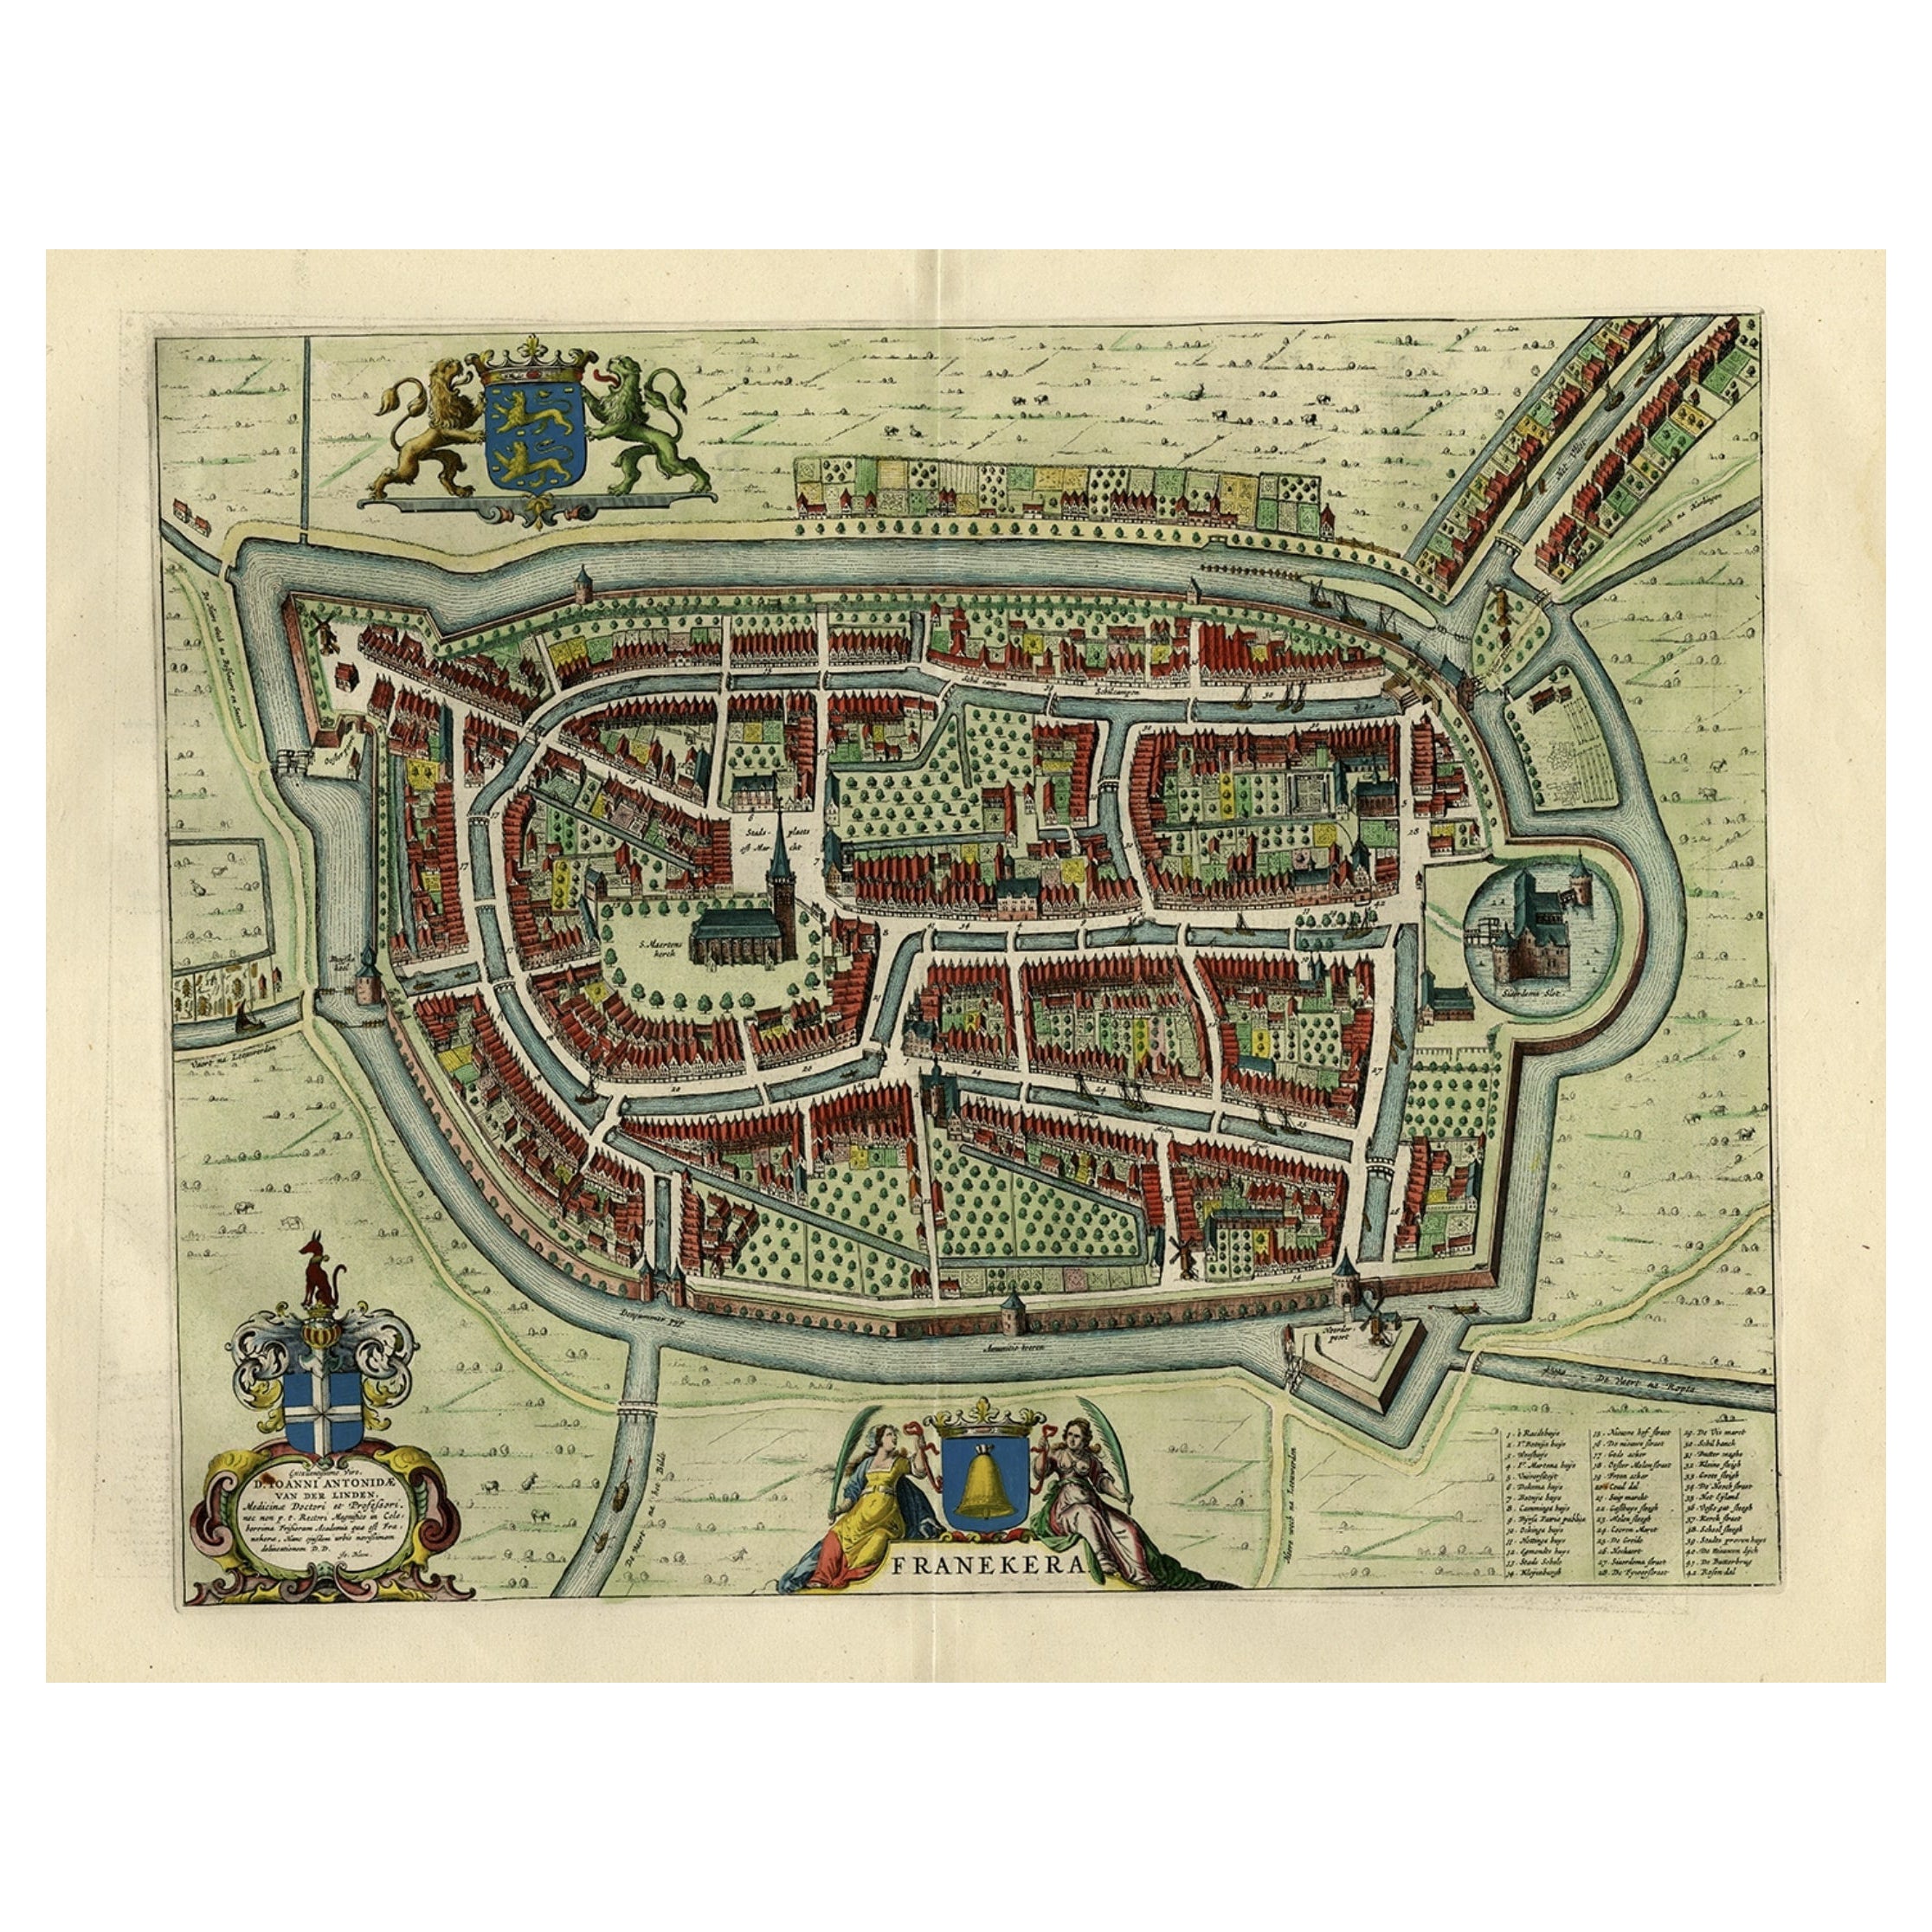 Old Map of the City of Franeker, Friesland by the Famous Mapmaker Blaeu, 1652 For Sale